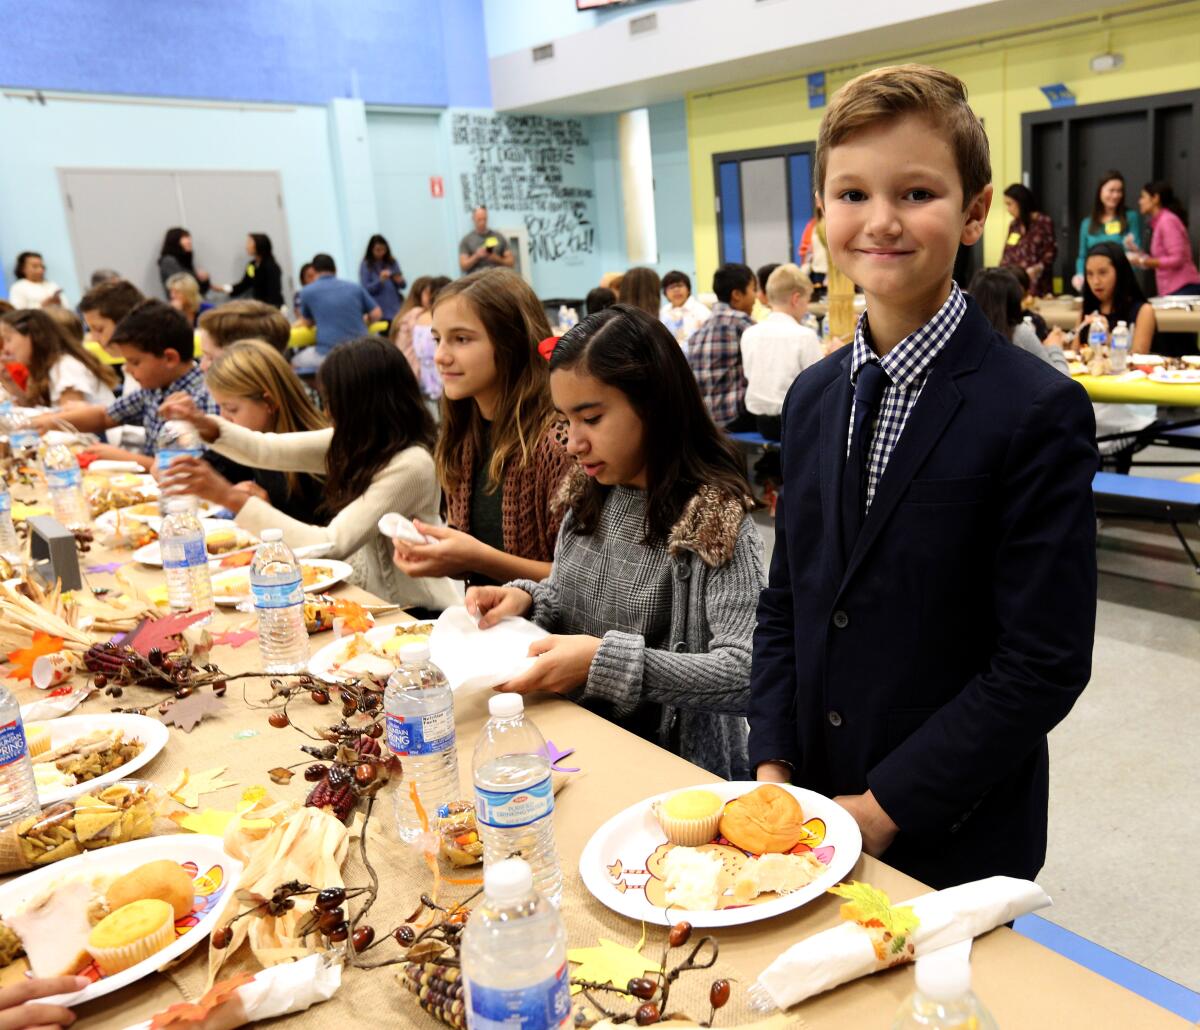 Students attending the annual Thanksgiving feast celebration at La Cañada Elementary School this year did not wear costumes representating Pilgrims or Native Americans, per the principal's request.